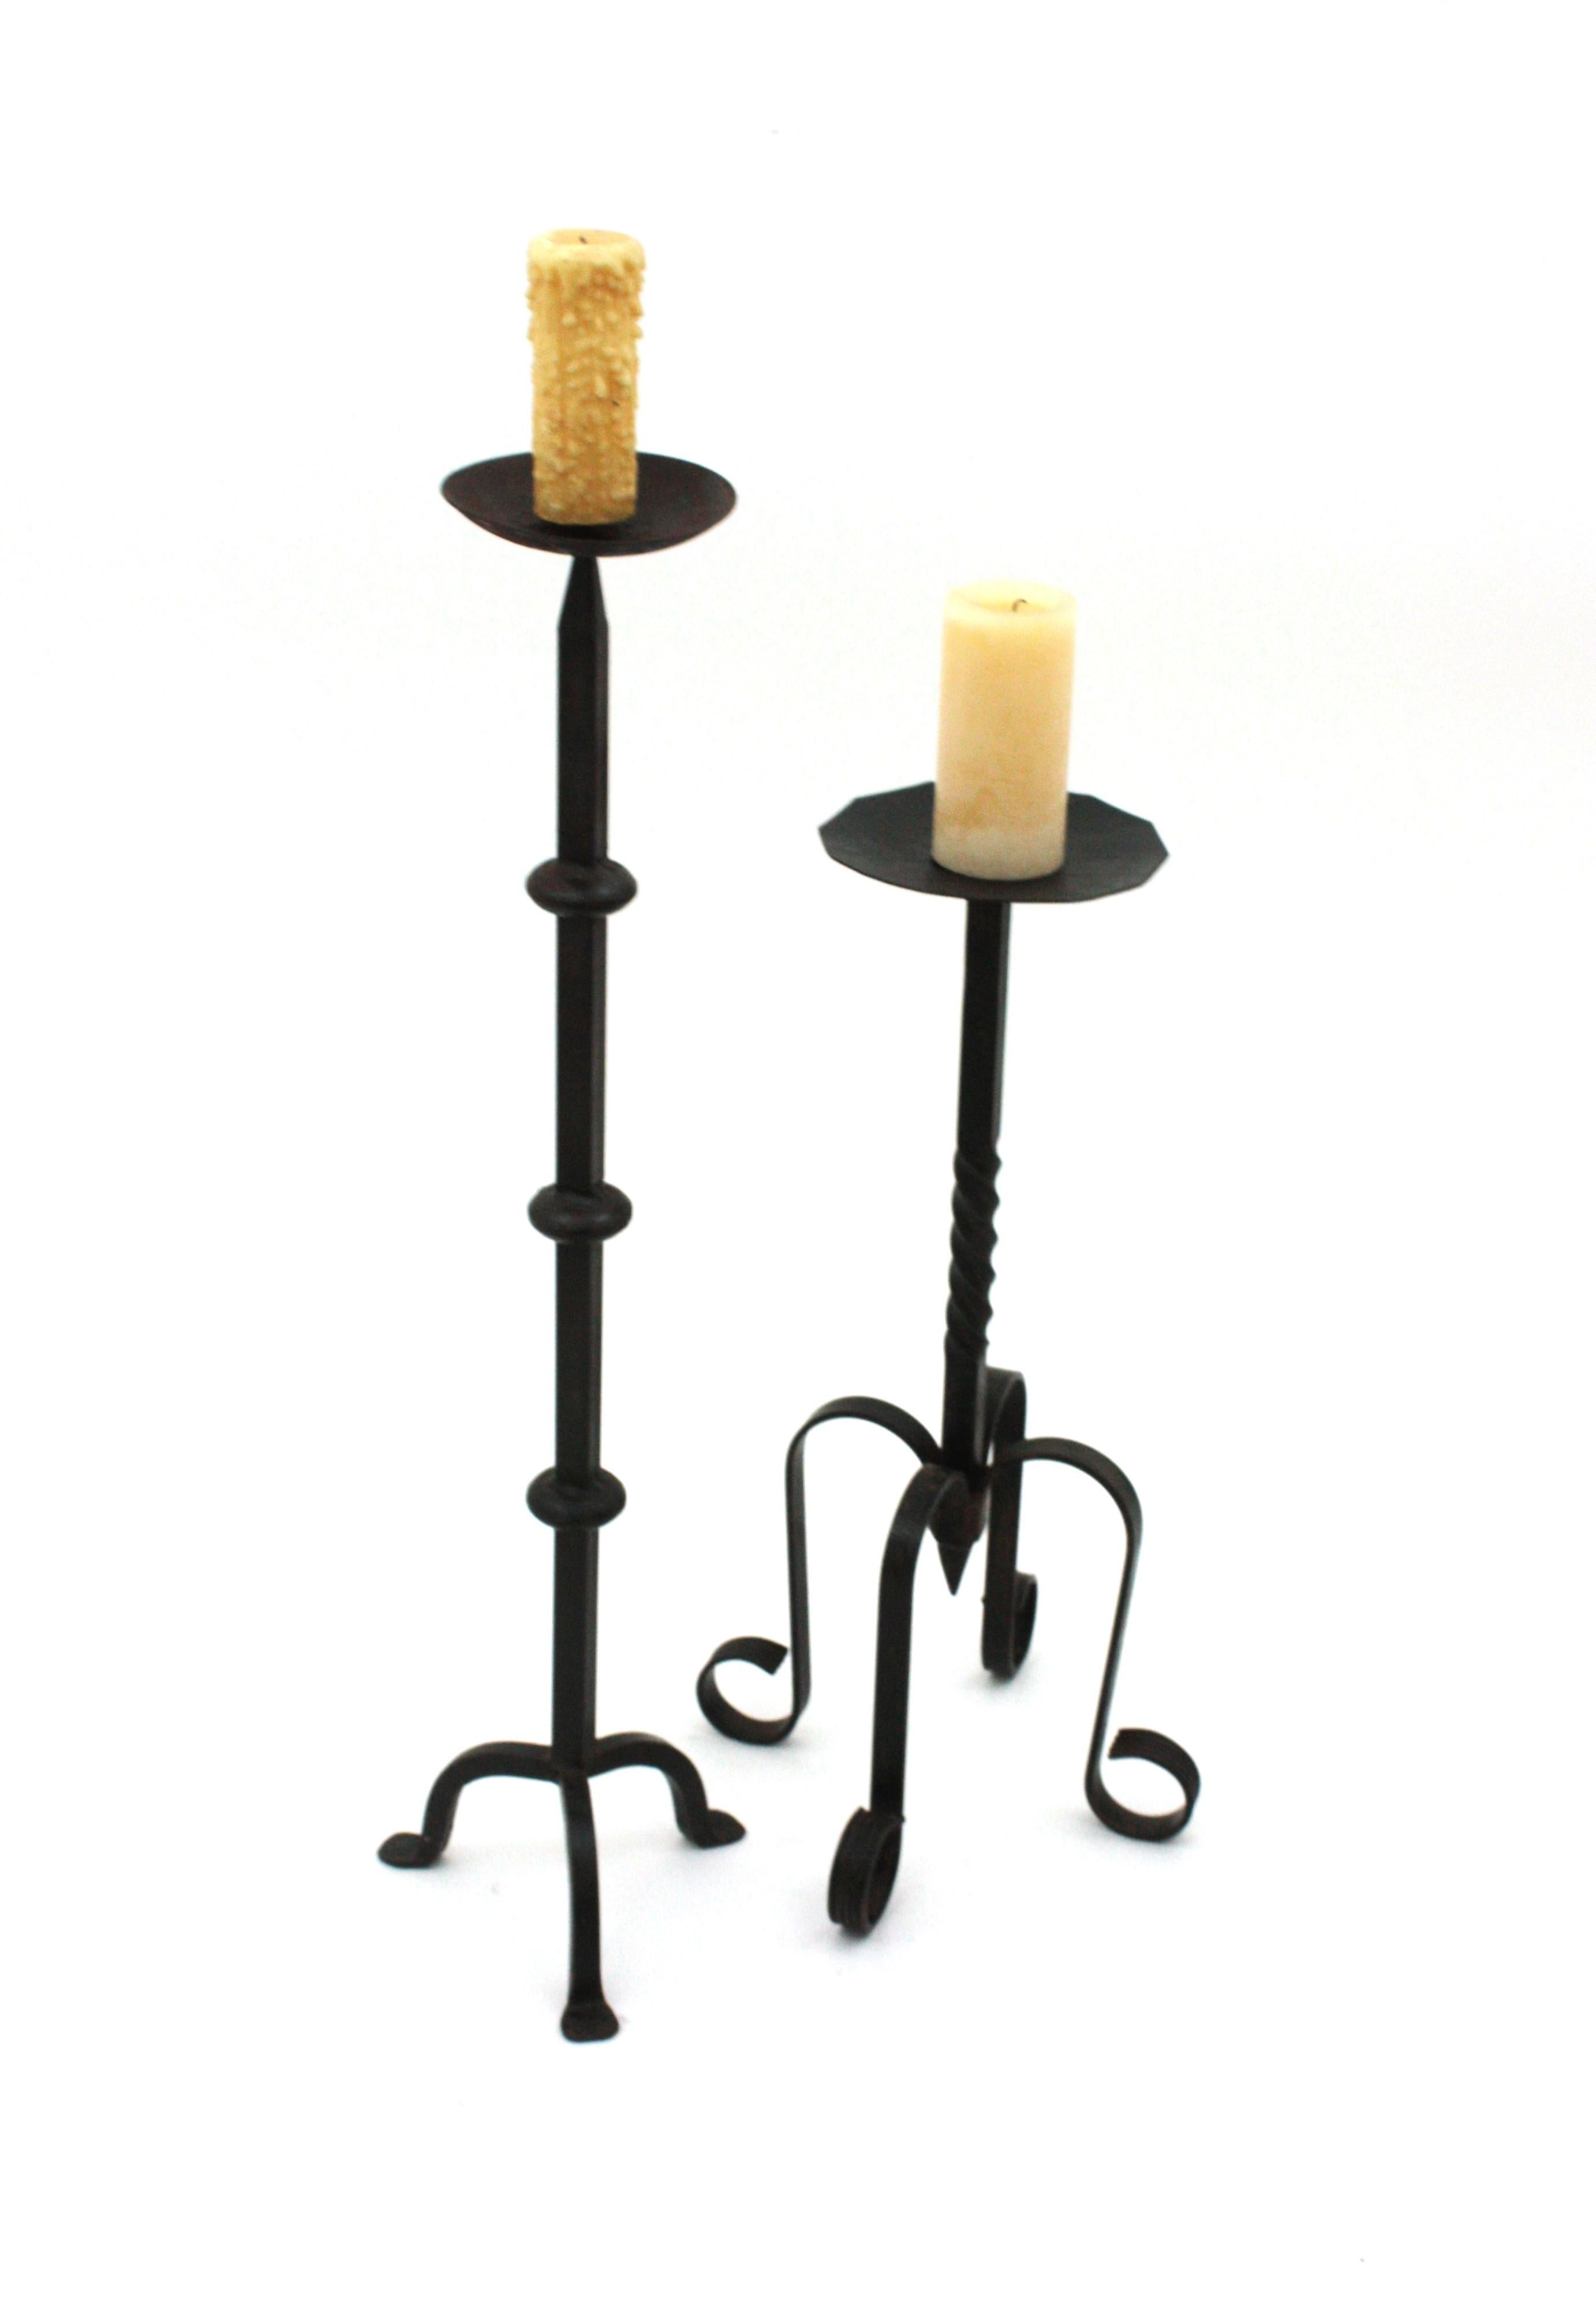 Spanish Medieval Hand Forged Iron Candle Stand / Floor Candle Holder For Sale 5